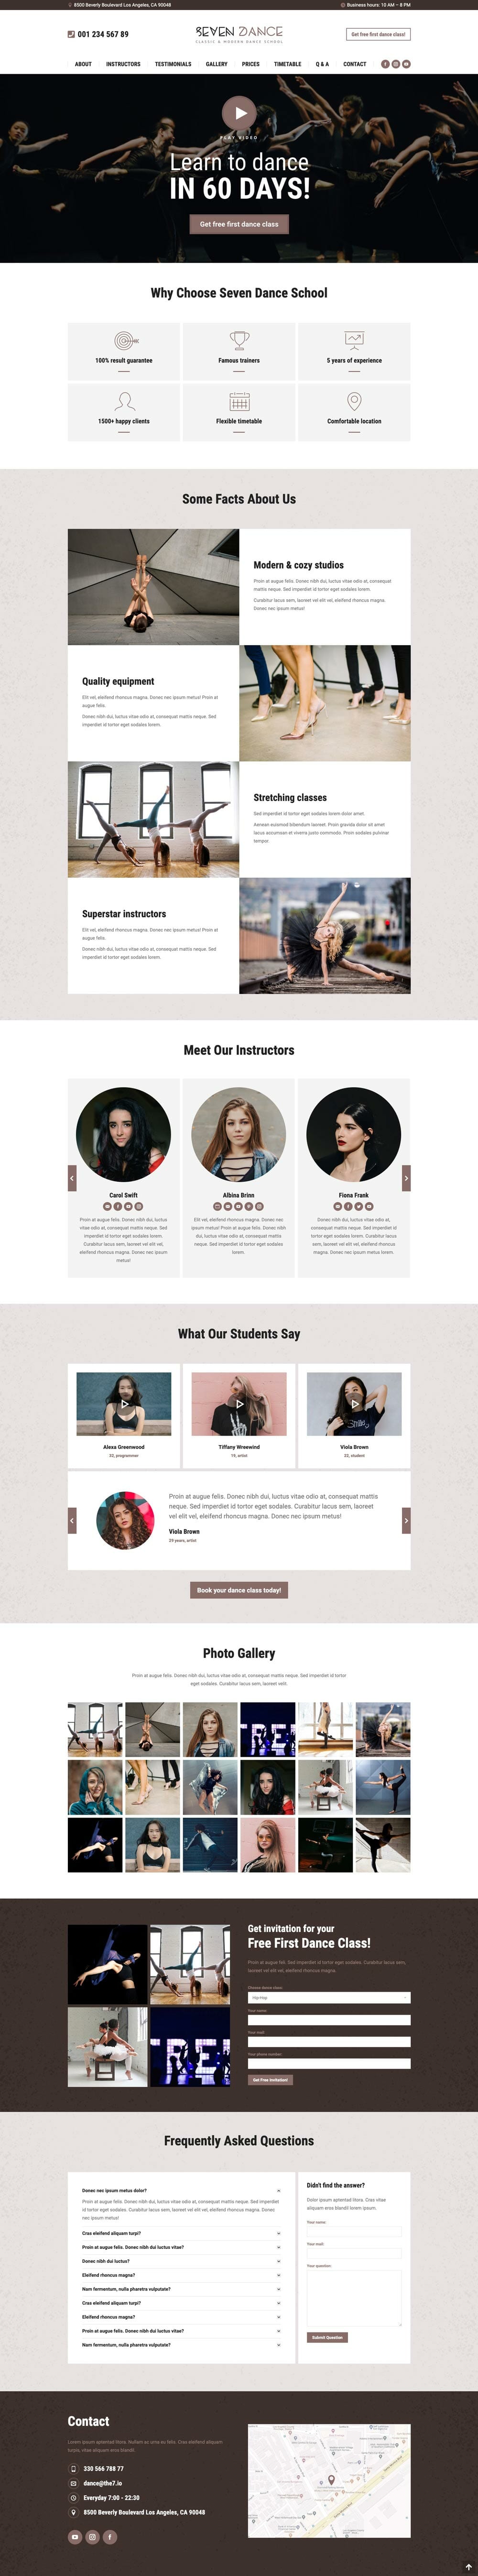 onepage-personal-template-sample-design6